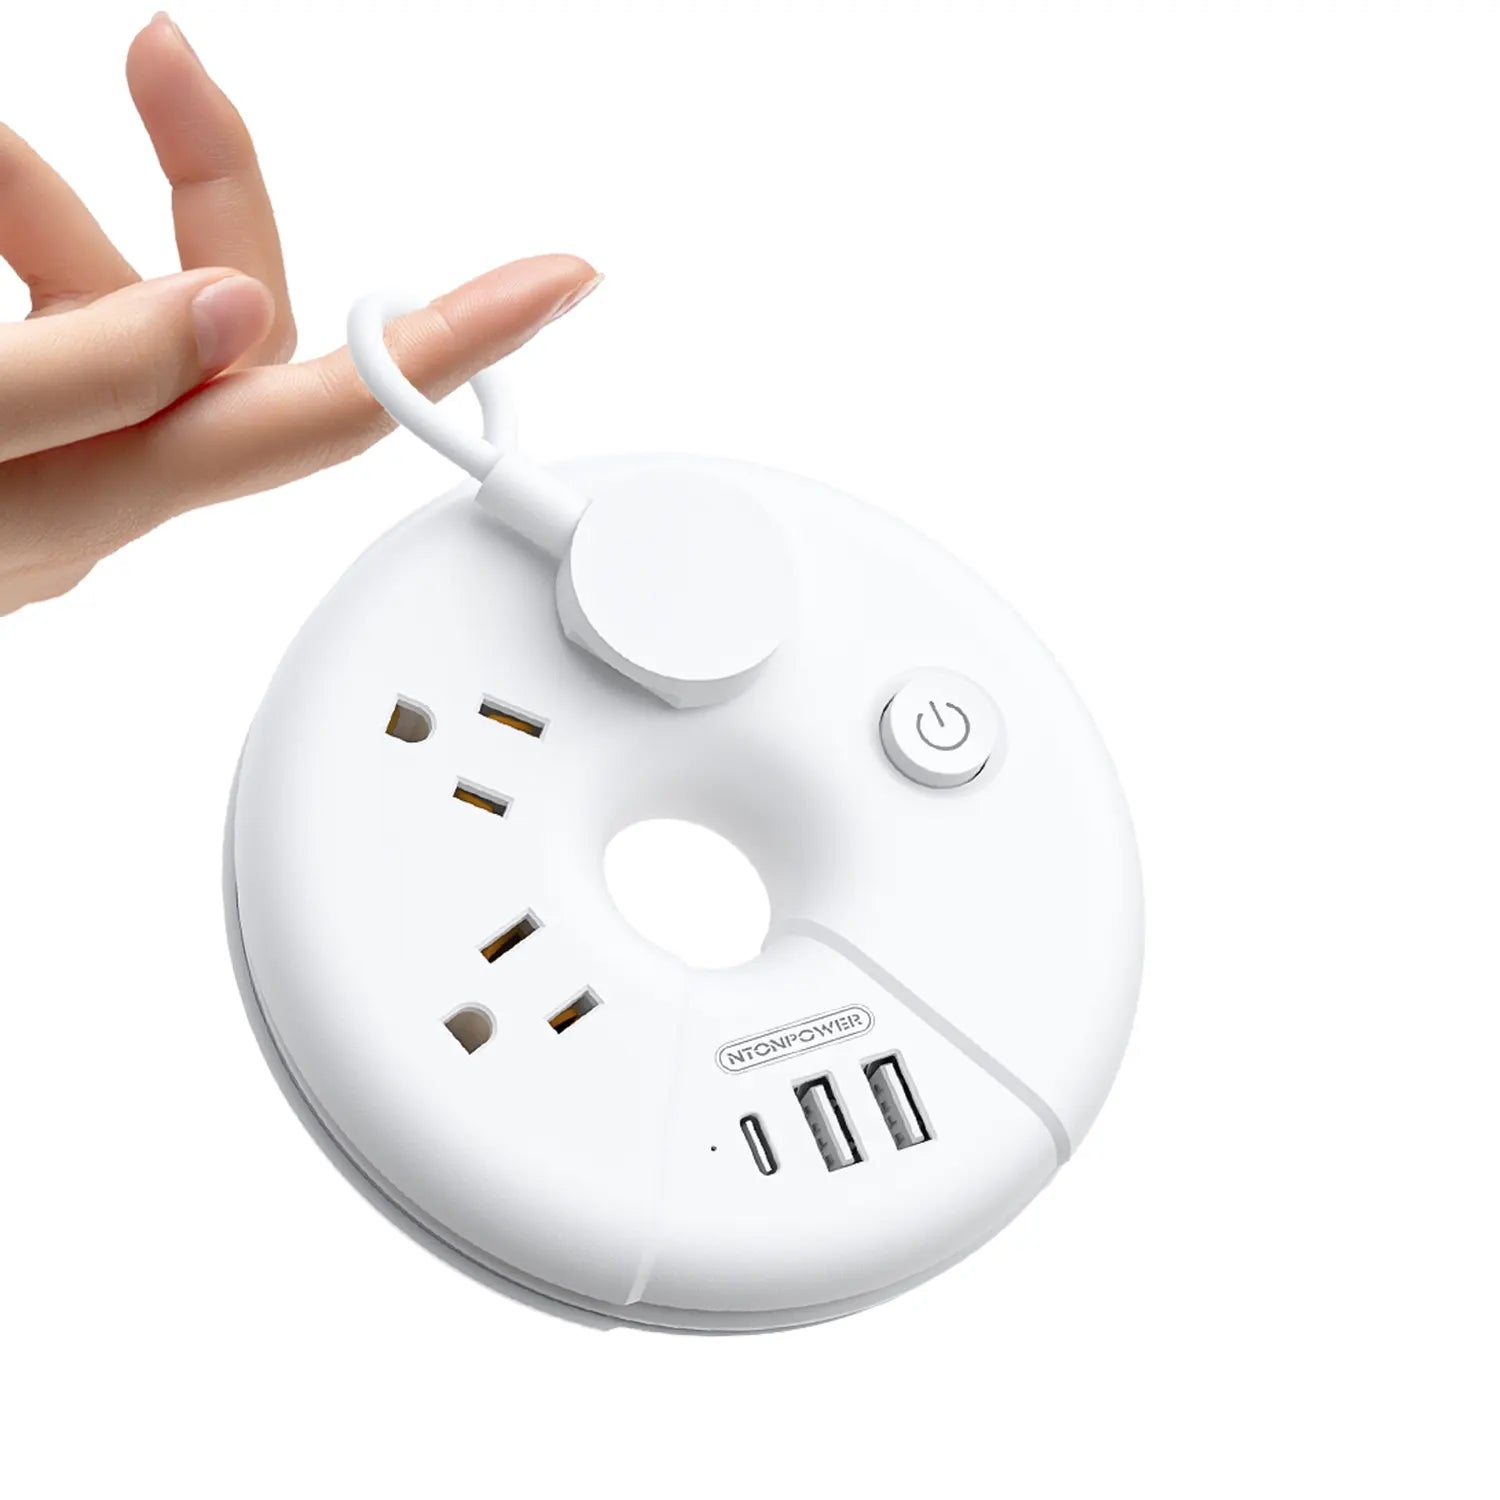 Ntonpower New i-Donut Power Strip 3 Outlets 2 USB-A 1 Type C